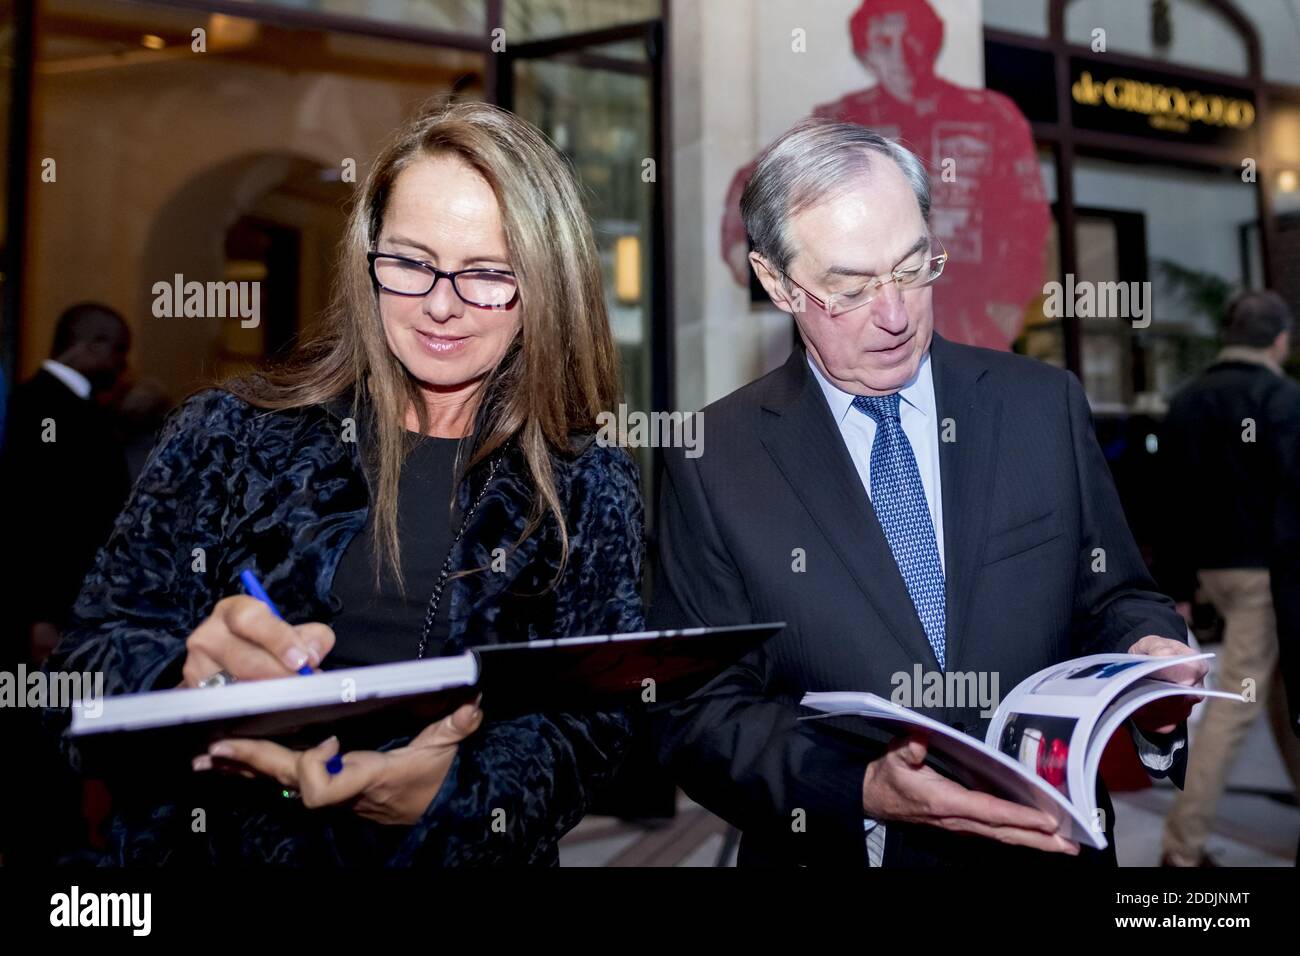 Laurence Jenkell, sculptor, signing the book for Claude Guéant, French politician, ceremony of the Exposition GV Monumental for FIAC, Hotel Prince de Galles, Paris, France. Photo by Jana Call me J/ABACAPRESS.COM Stock Photo